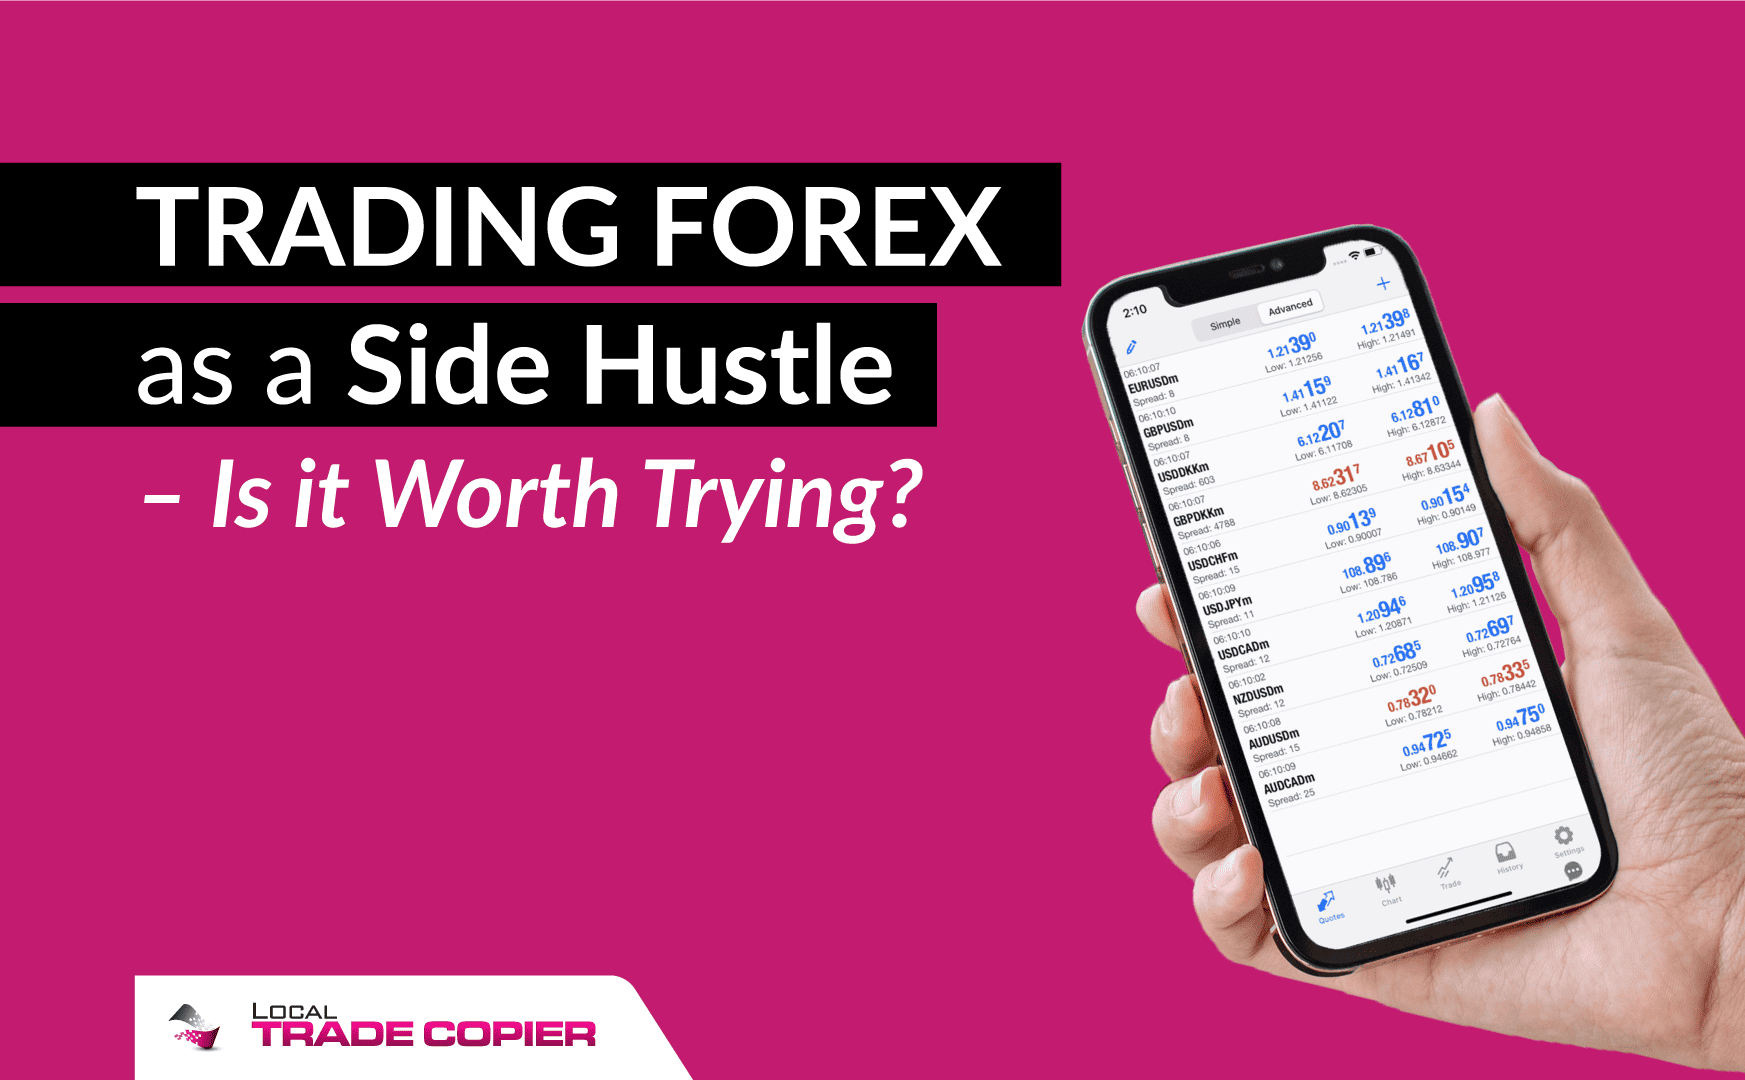 Trading Forex as a Side Hustle – Is it Worth Trying?